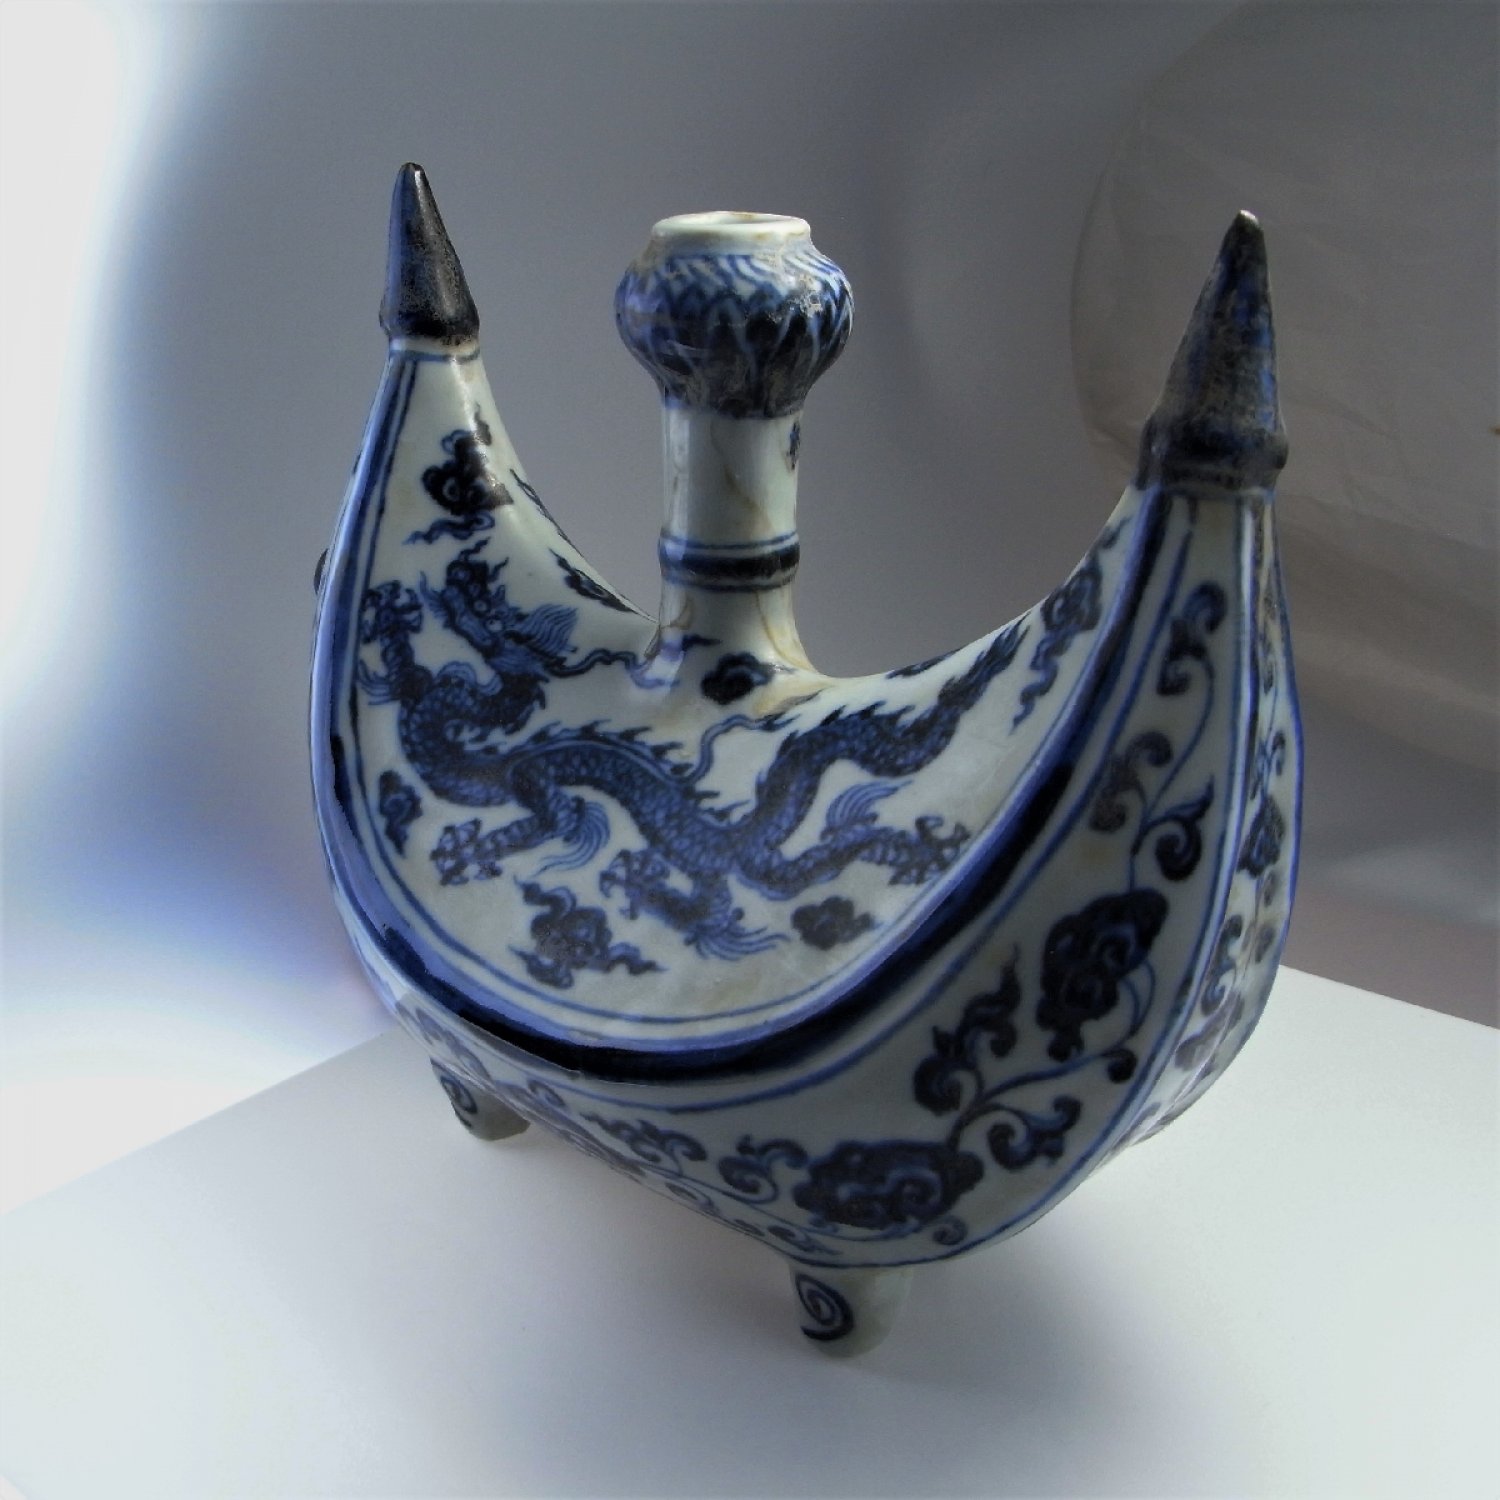 Xuande Blue and White Ming Dynasty Porcelain Pilgrim Flask Crescent Moon Six Character Mark Period 1426 to 1435 15th Century Porcelain